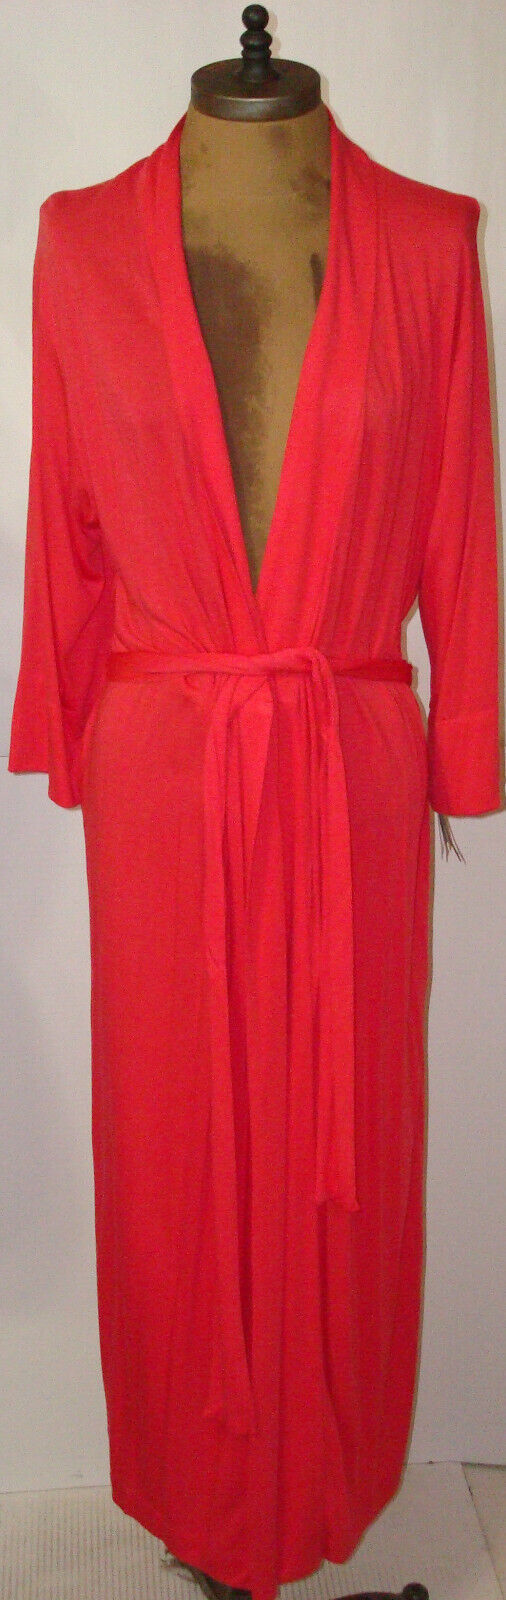 Primary image for NWT $180 New Natori Dark Pink Robe Womens XS Long Very Soft Solid Modal Pockets 